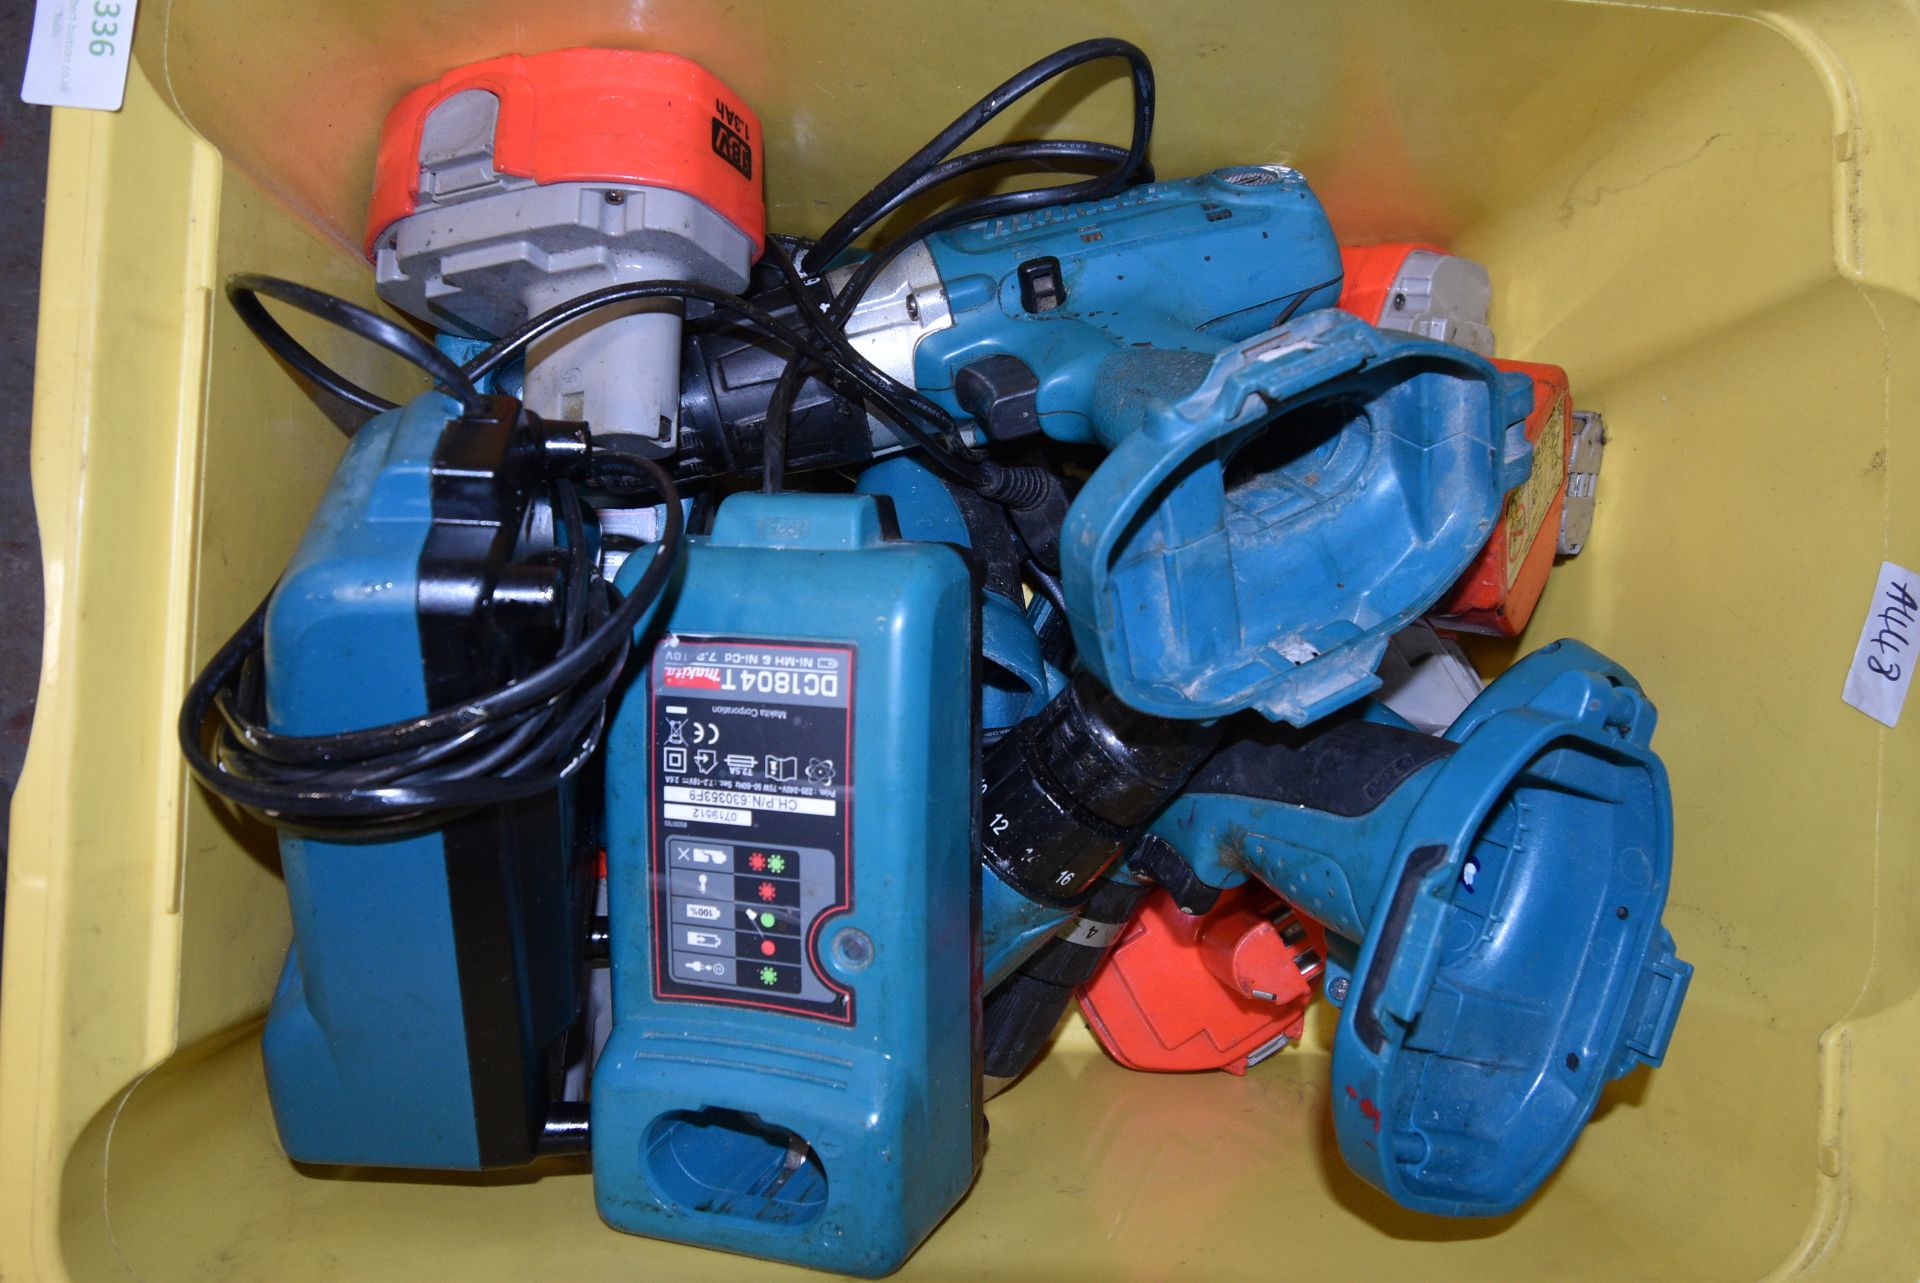 Quantity of Makita Drills with Batteries and Charg